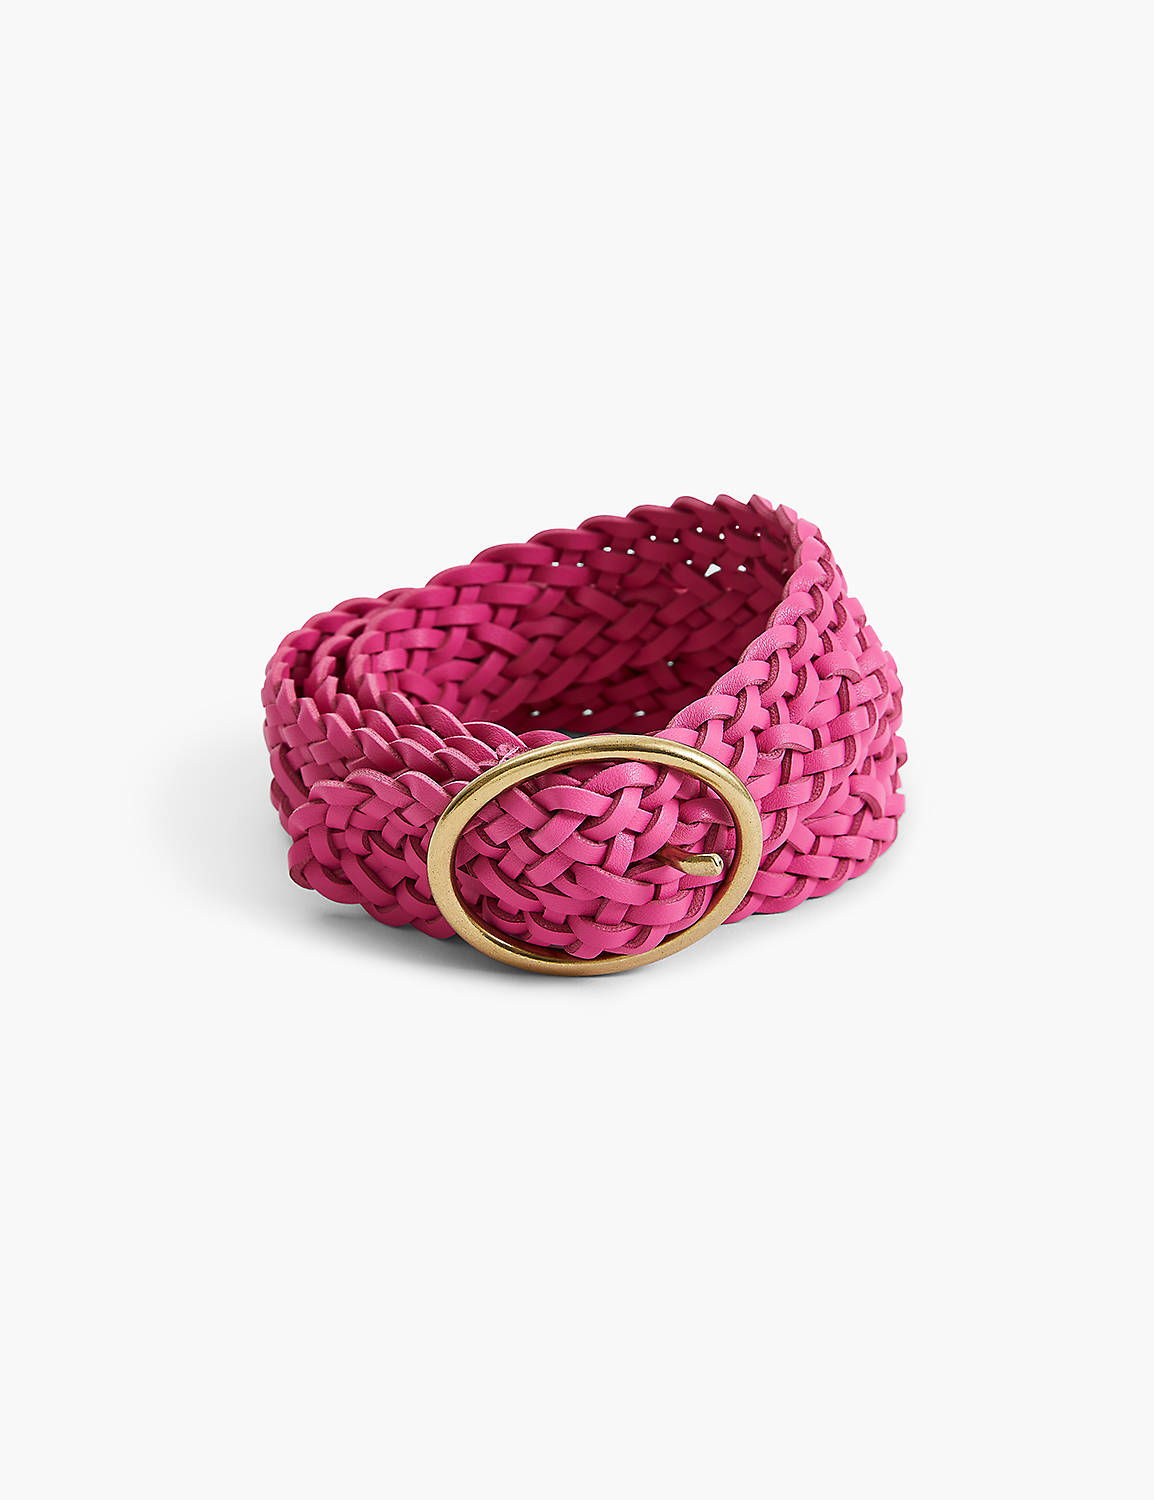 BRAIDED FAUX LEATHER OVAL RING BELT Product Image 1